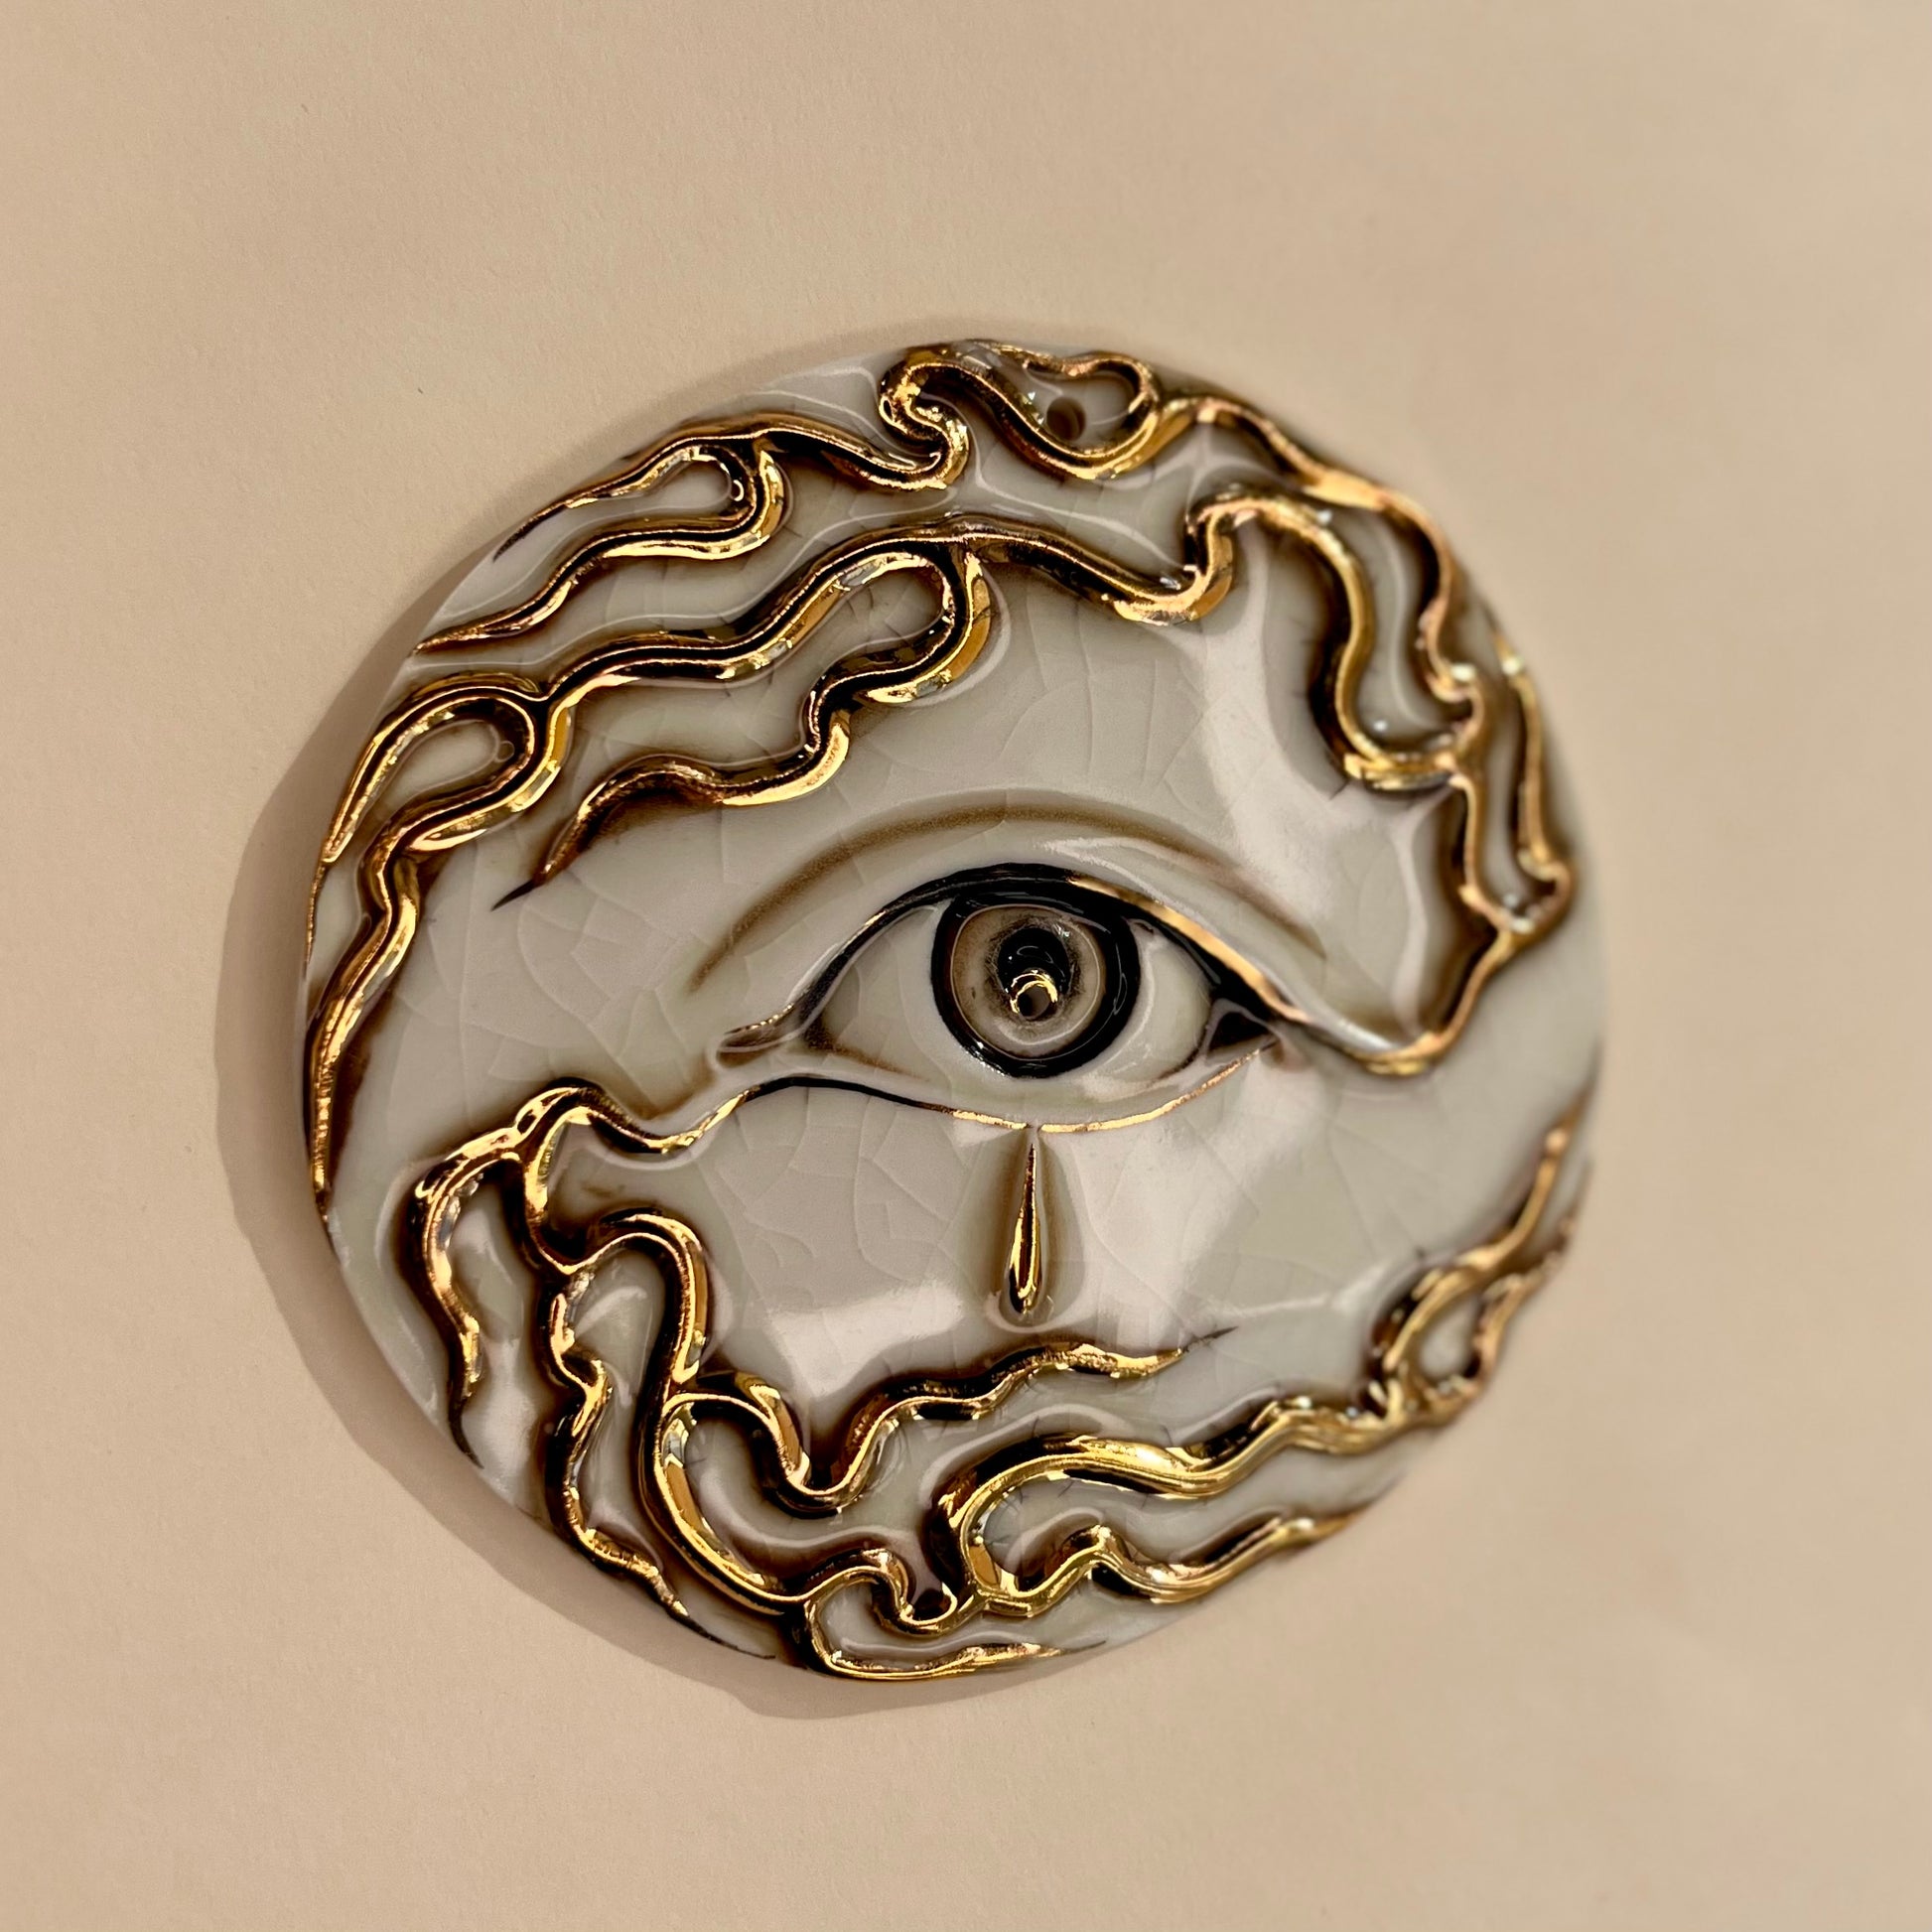 Flaming Eye Incense Holder / Wall Ornament 2a -  Hand crafted Porcelain Home Ornament. Circular ornament with Eye and Flame Border.